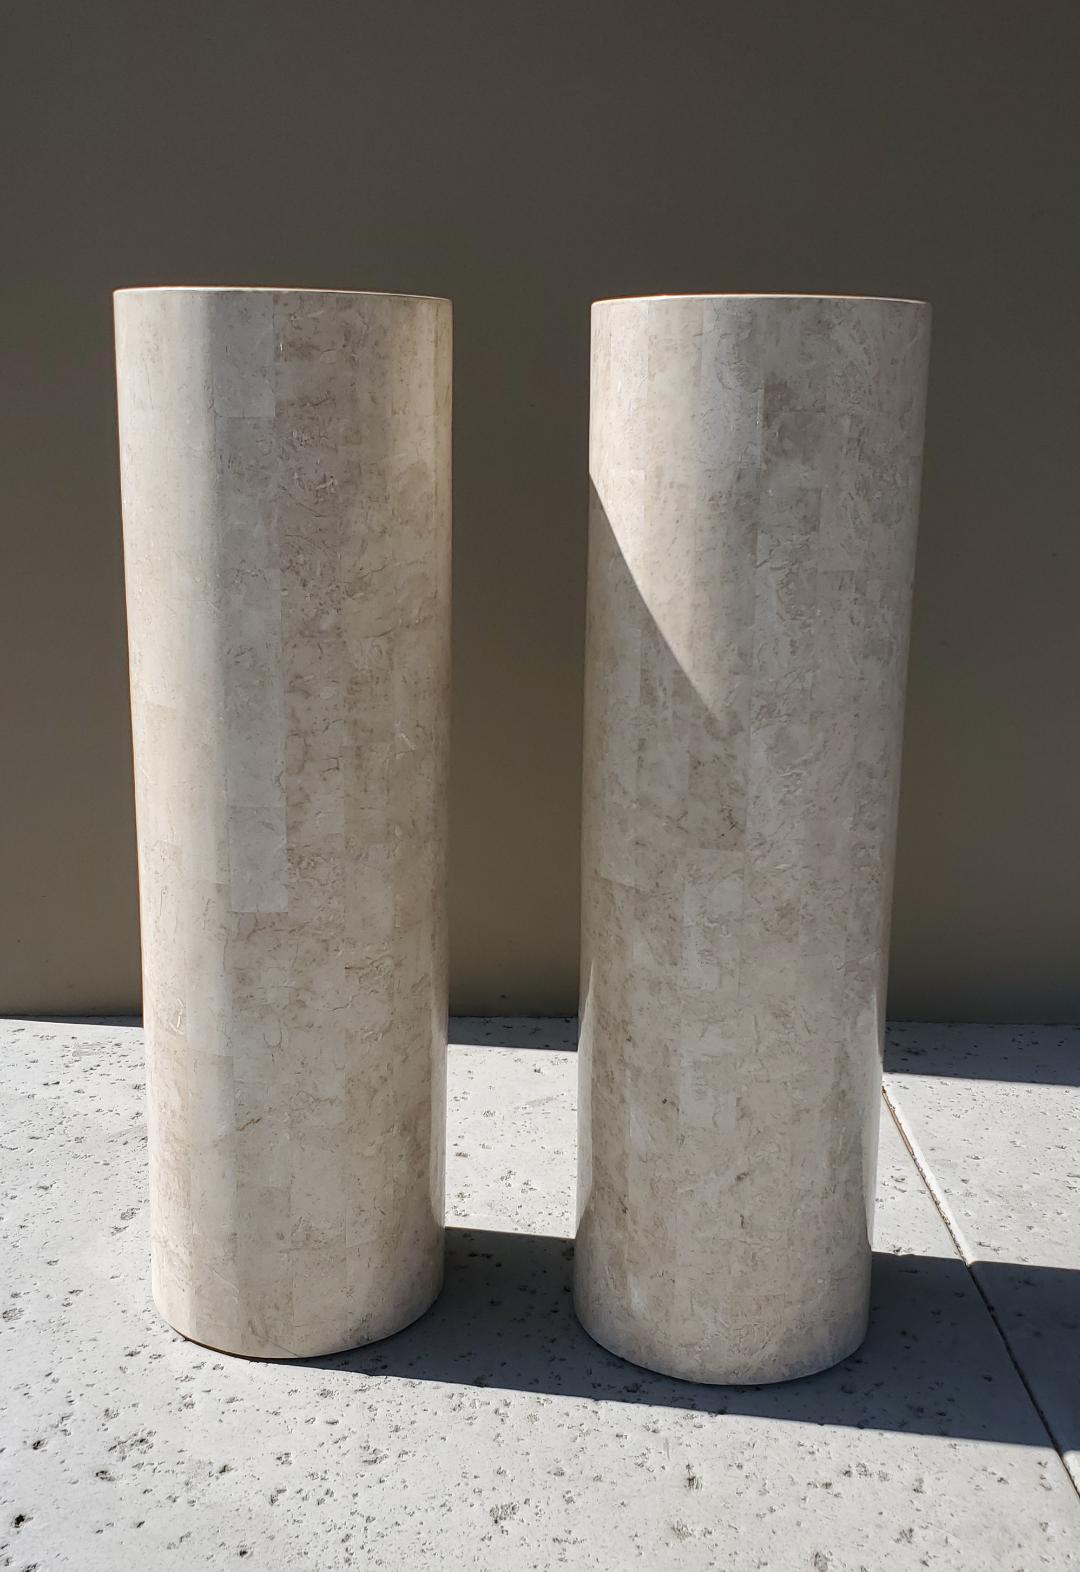 American Marquis Collection of Beverly Hills, 1980s Round Tessellated Stone Pedestals 2